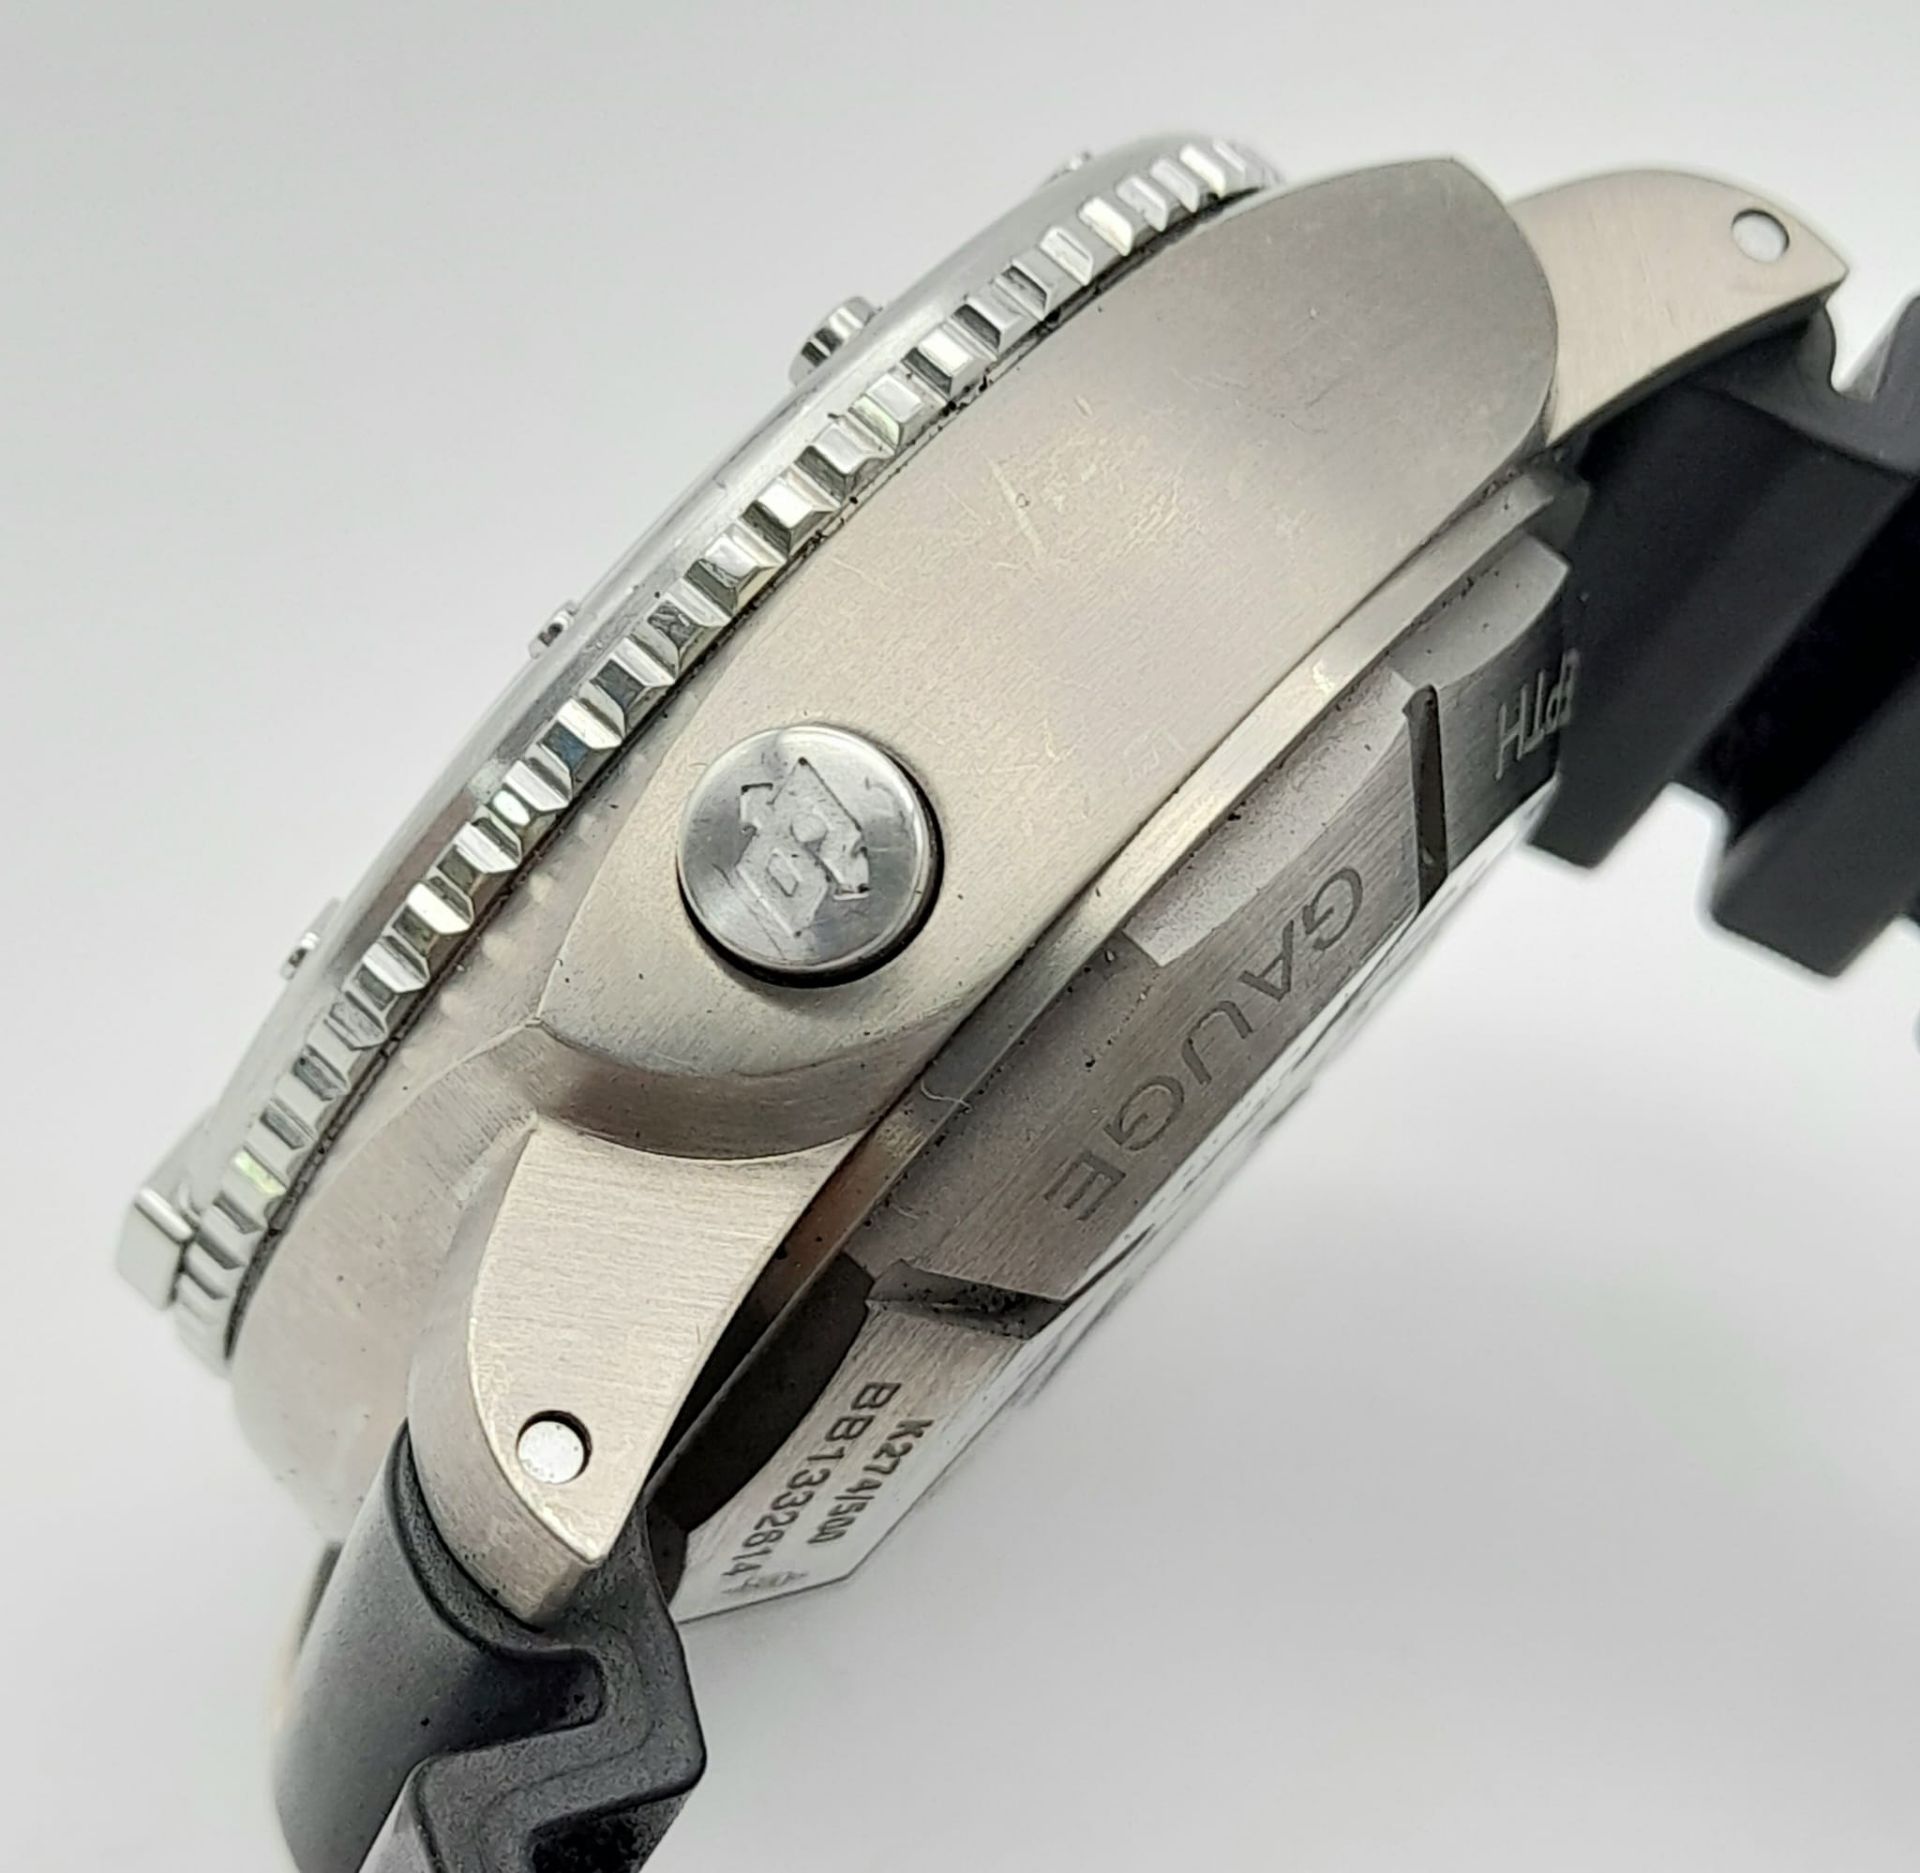 An Incredible Limited Edition Panerai Luminor 1950 Depth Gauge Automatic Gents Watch. A special - Image 7 of 21